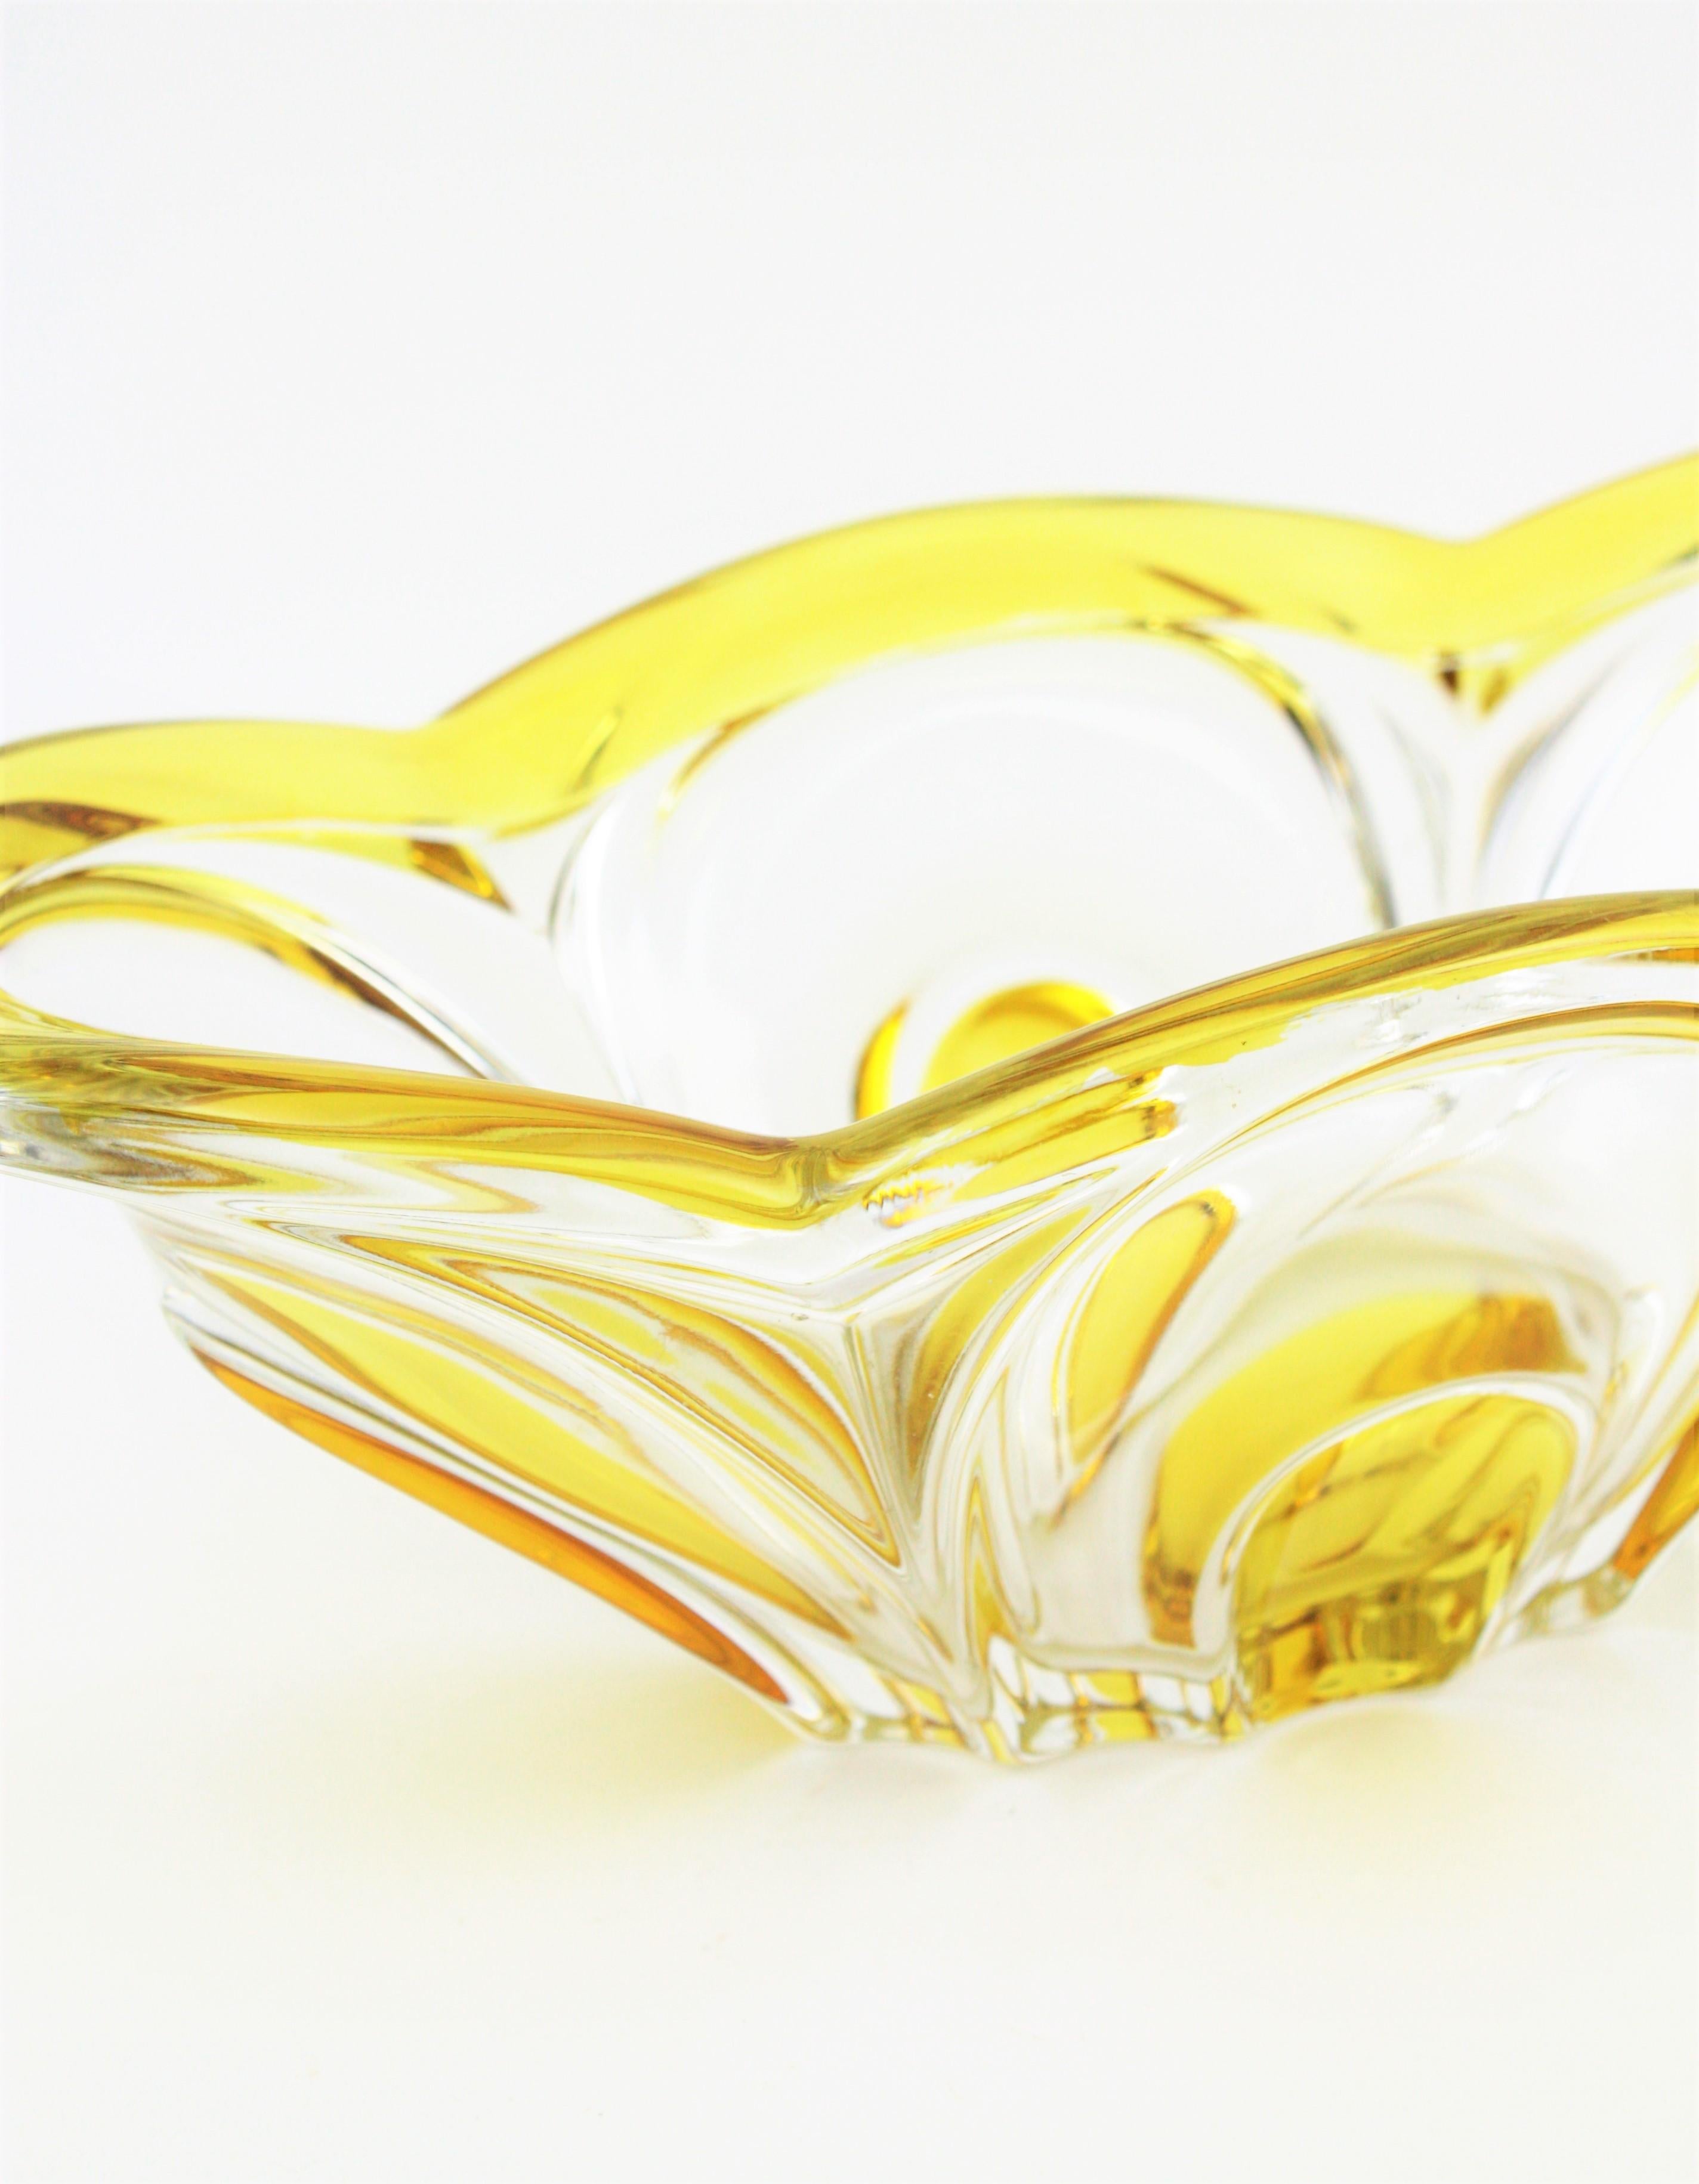 Italian 1950s Scalloped Sommerso Yellow and Clear Murano Glass Centrepiece 3